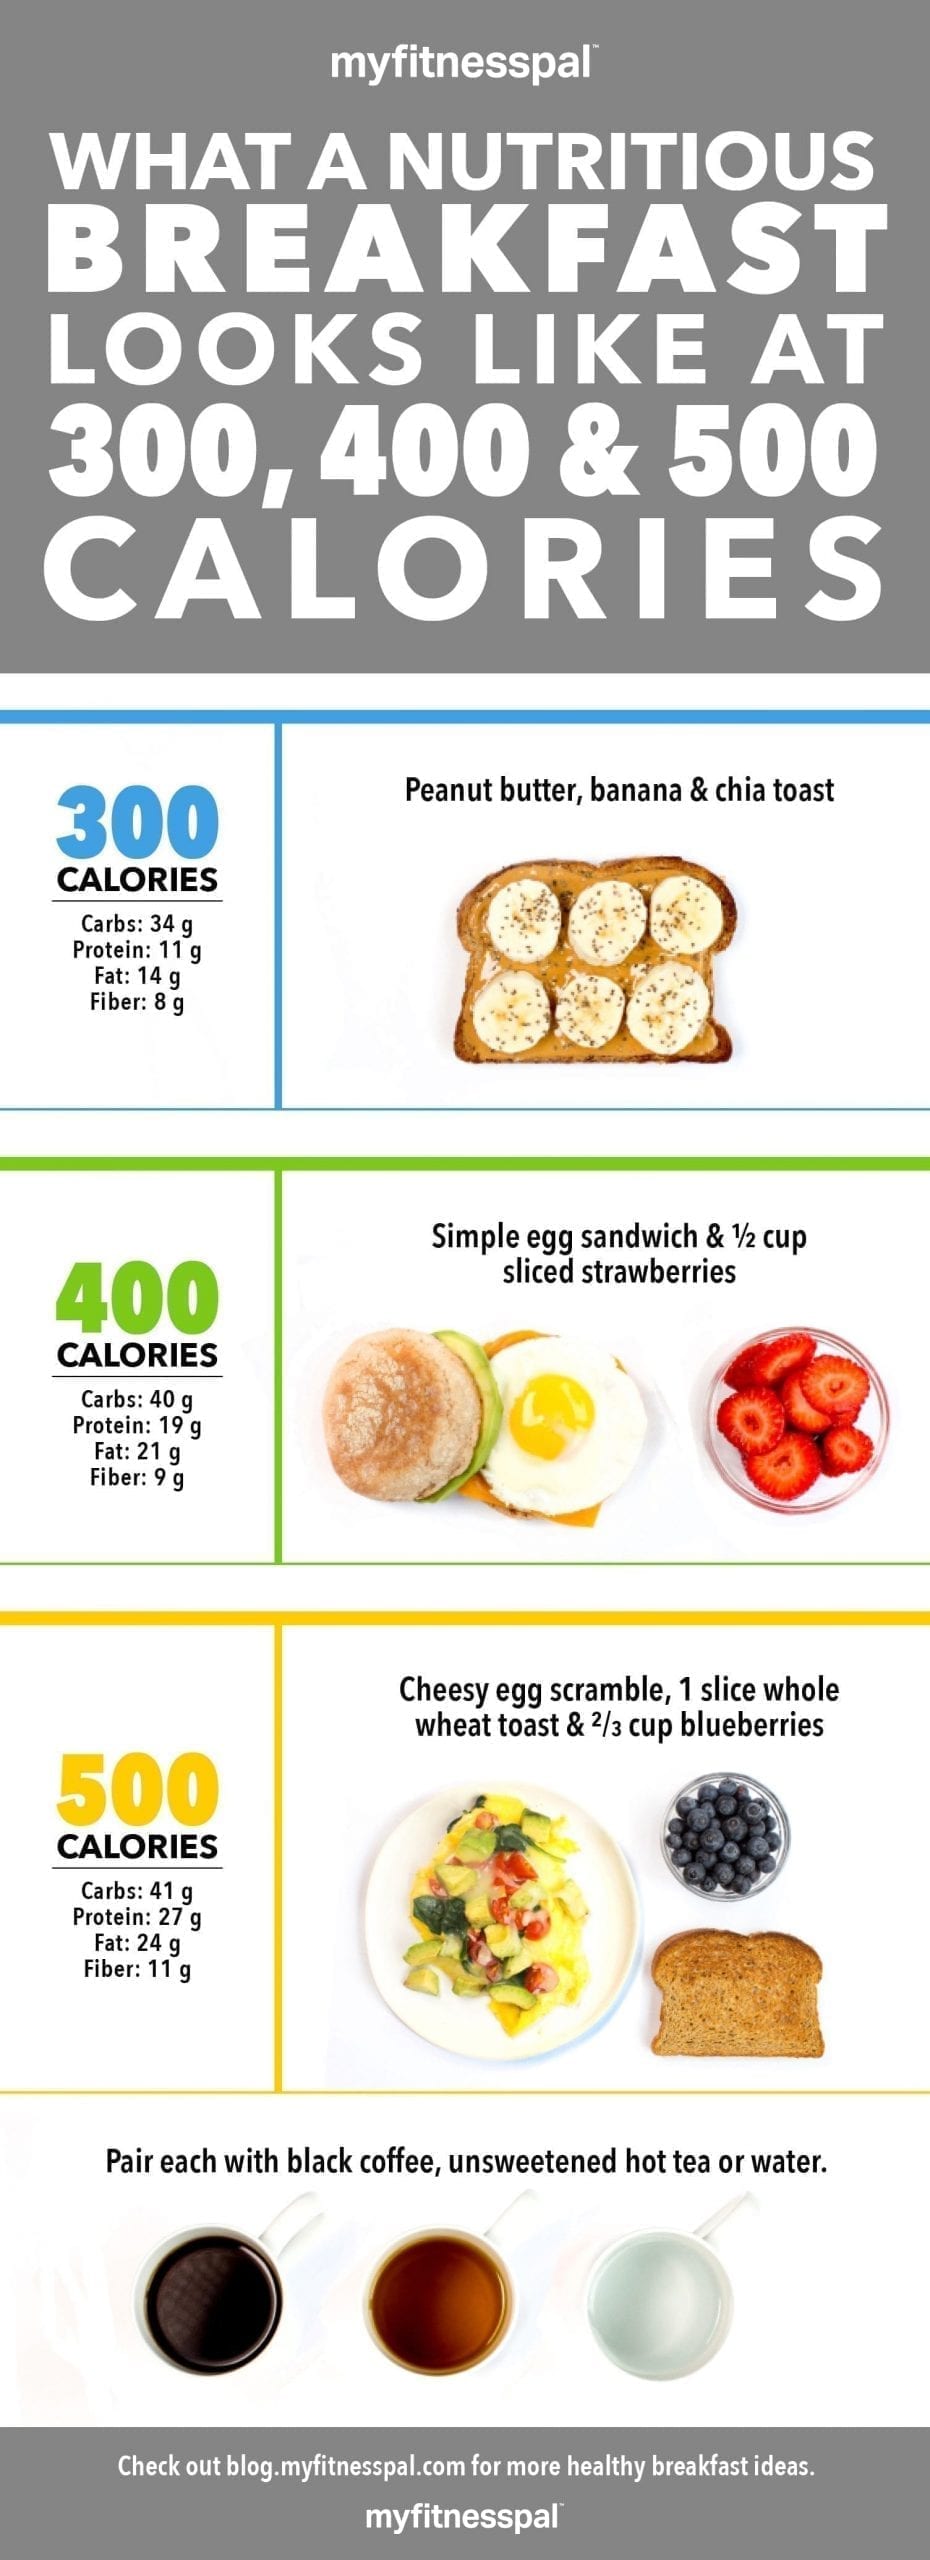 What a Nutritious Breakfast Looks Like at 300, 400 & 500 Calories ...